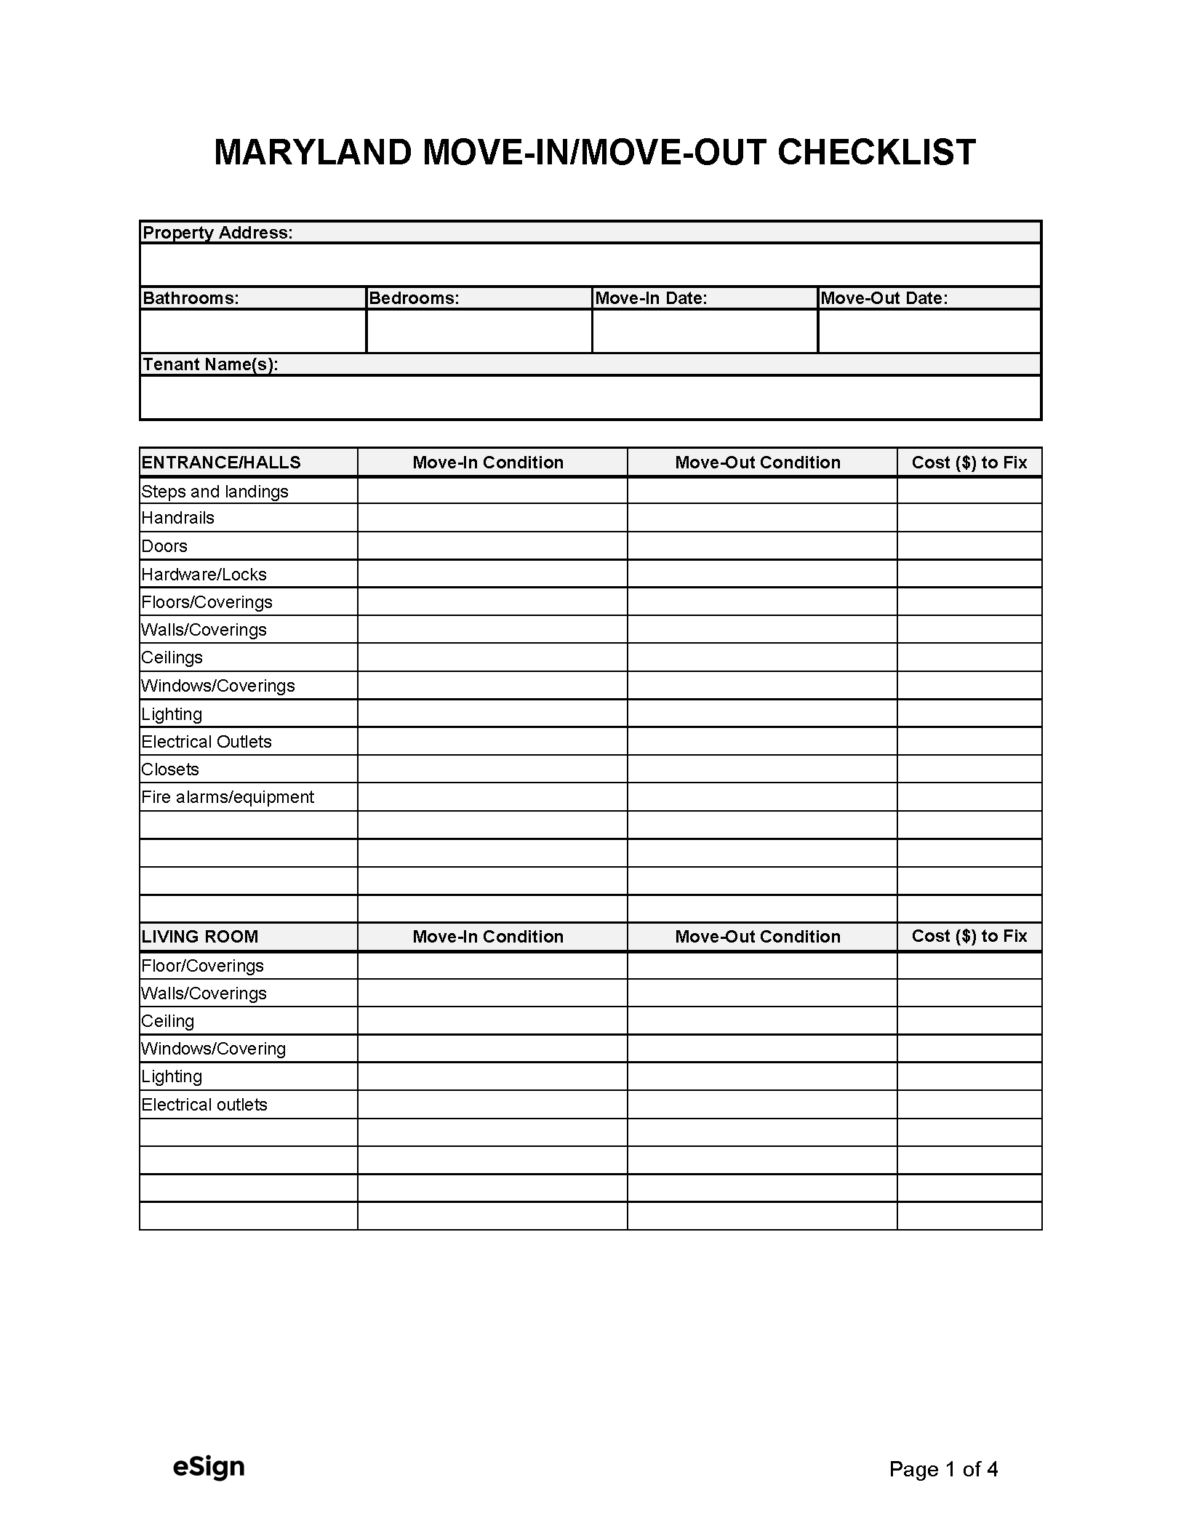 free-maryland-move-in-move-out-checklist-pdf-word